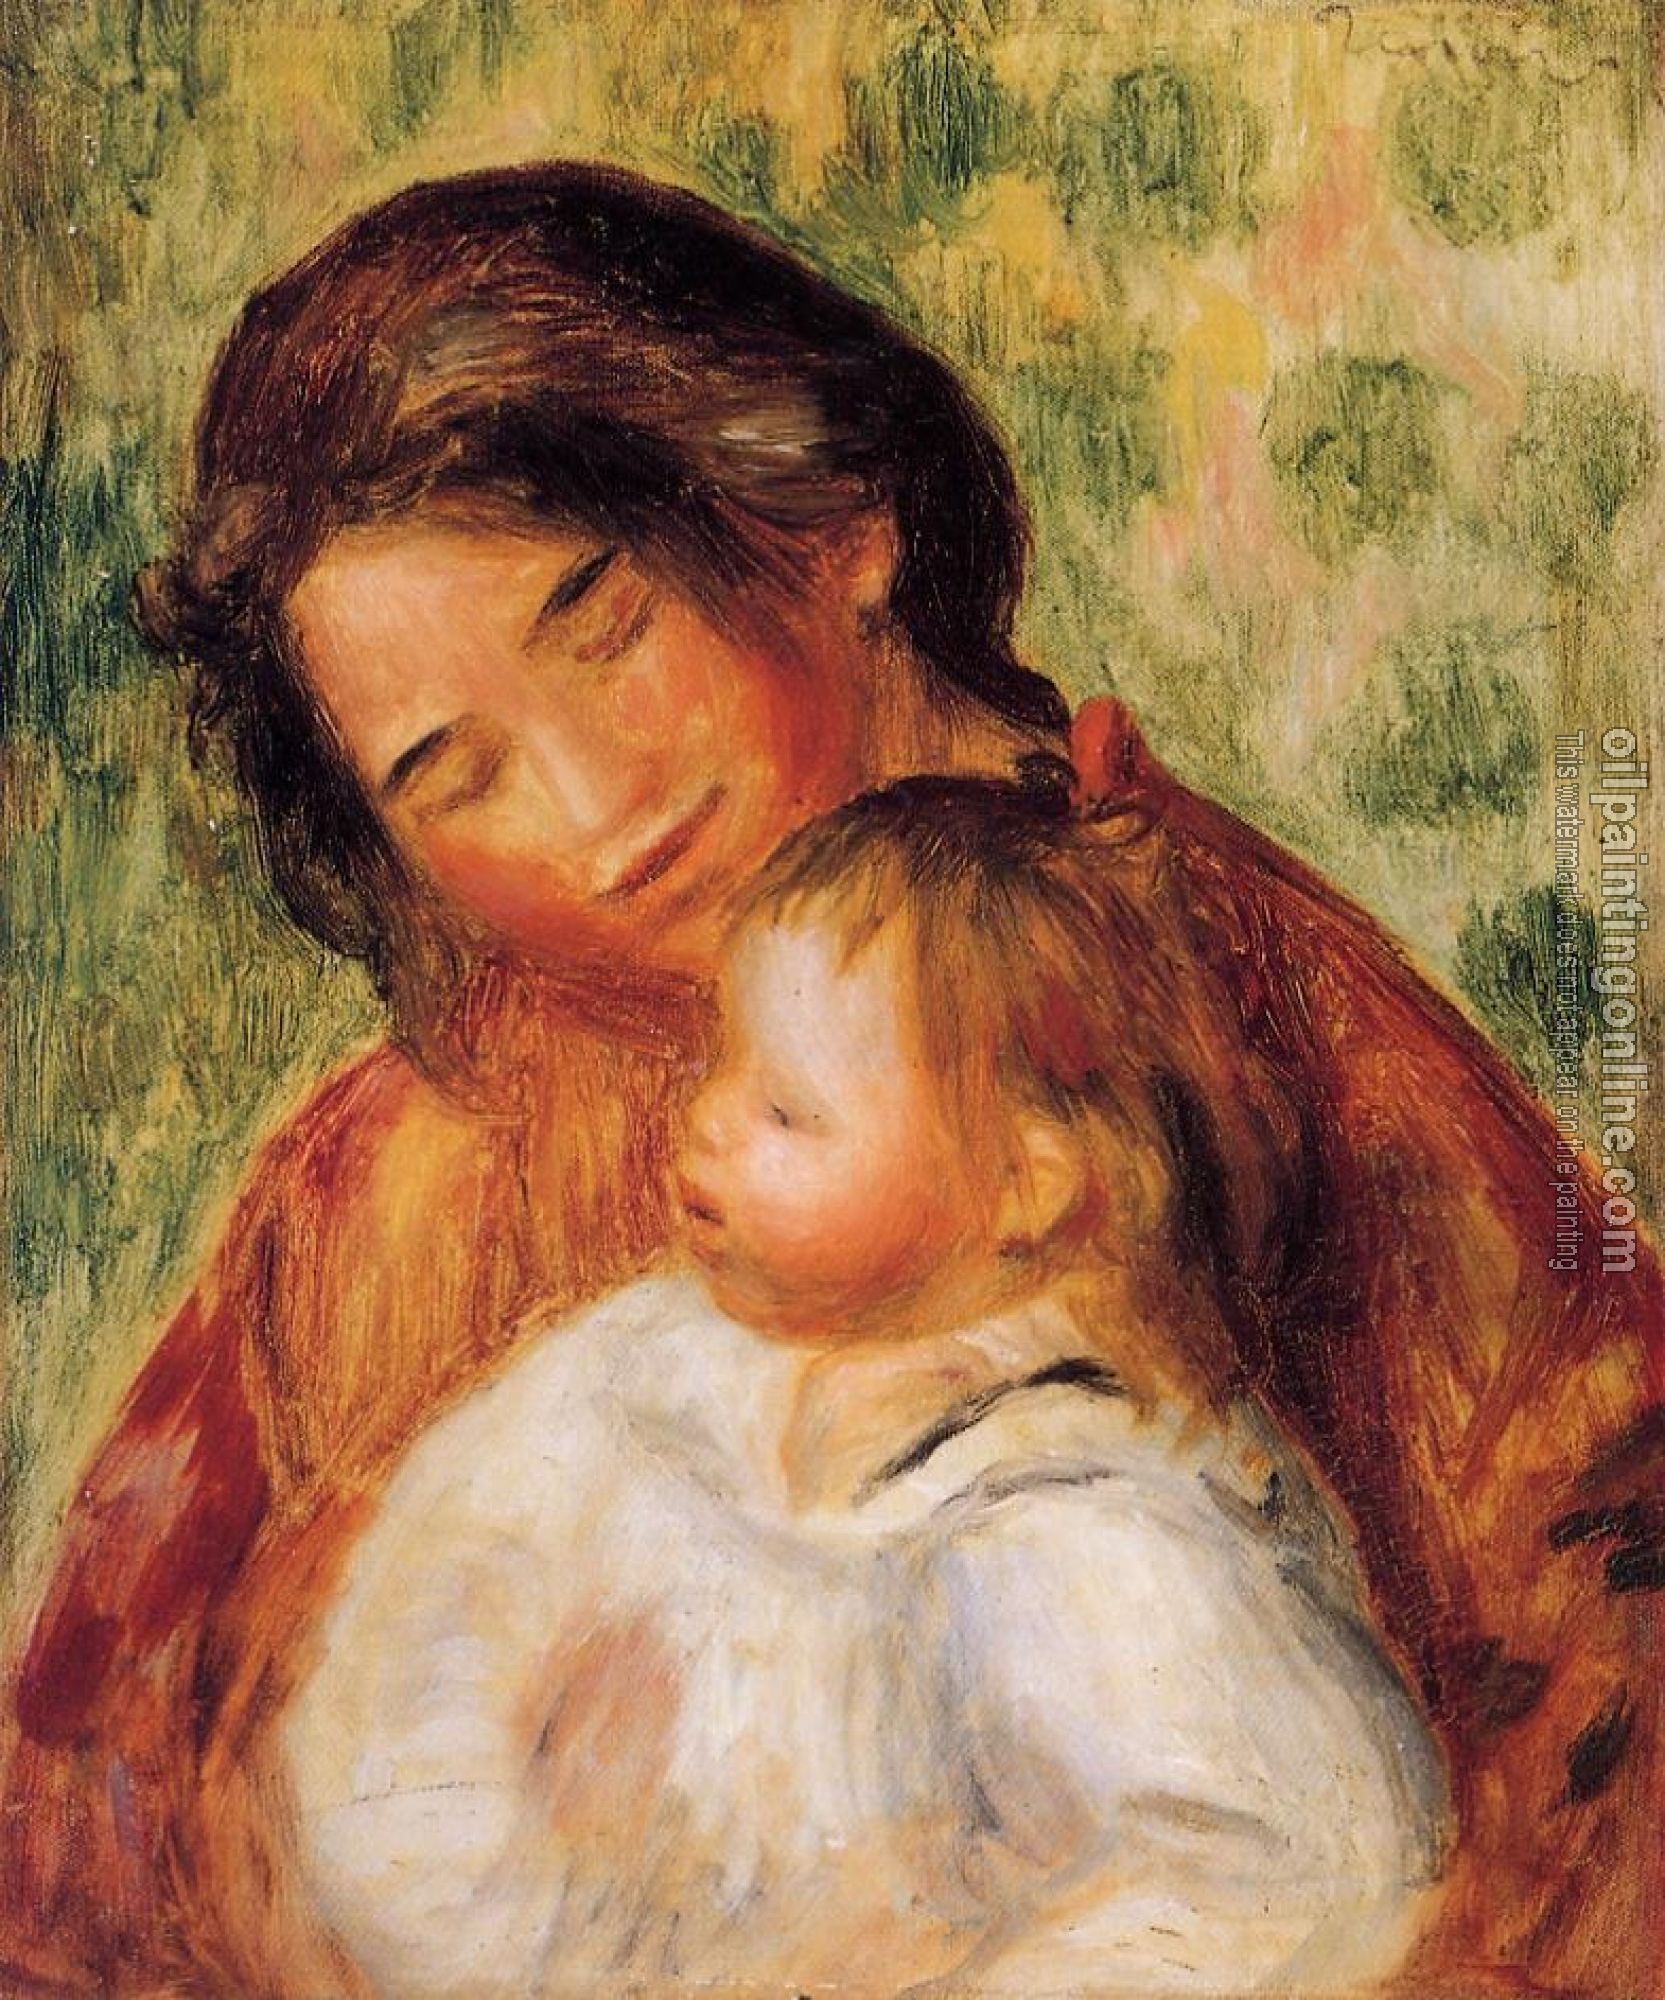 Renoir, Pierre Auguste - Woman and Child